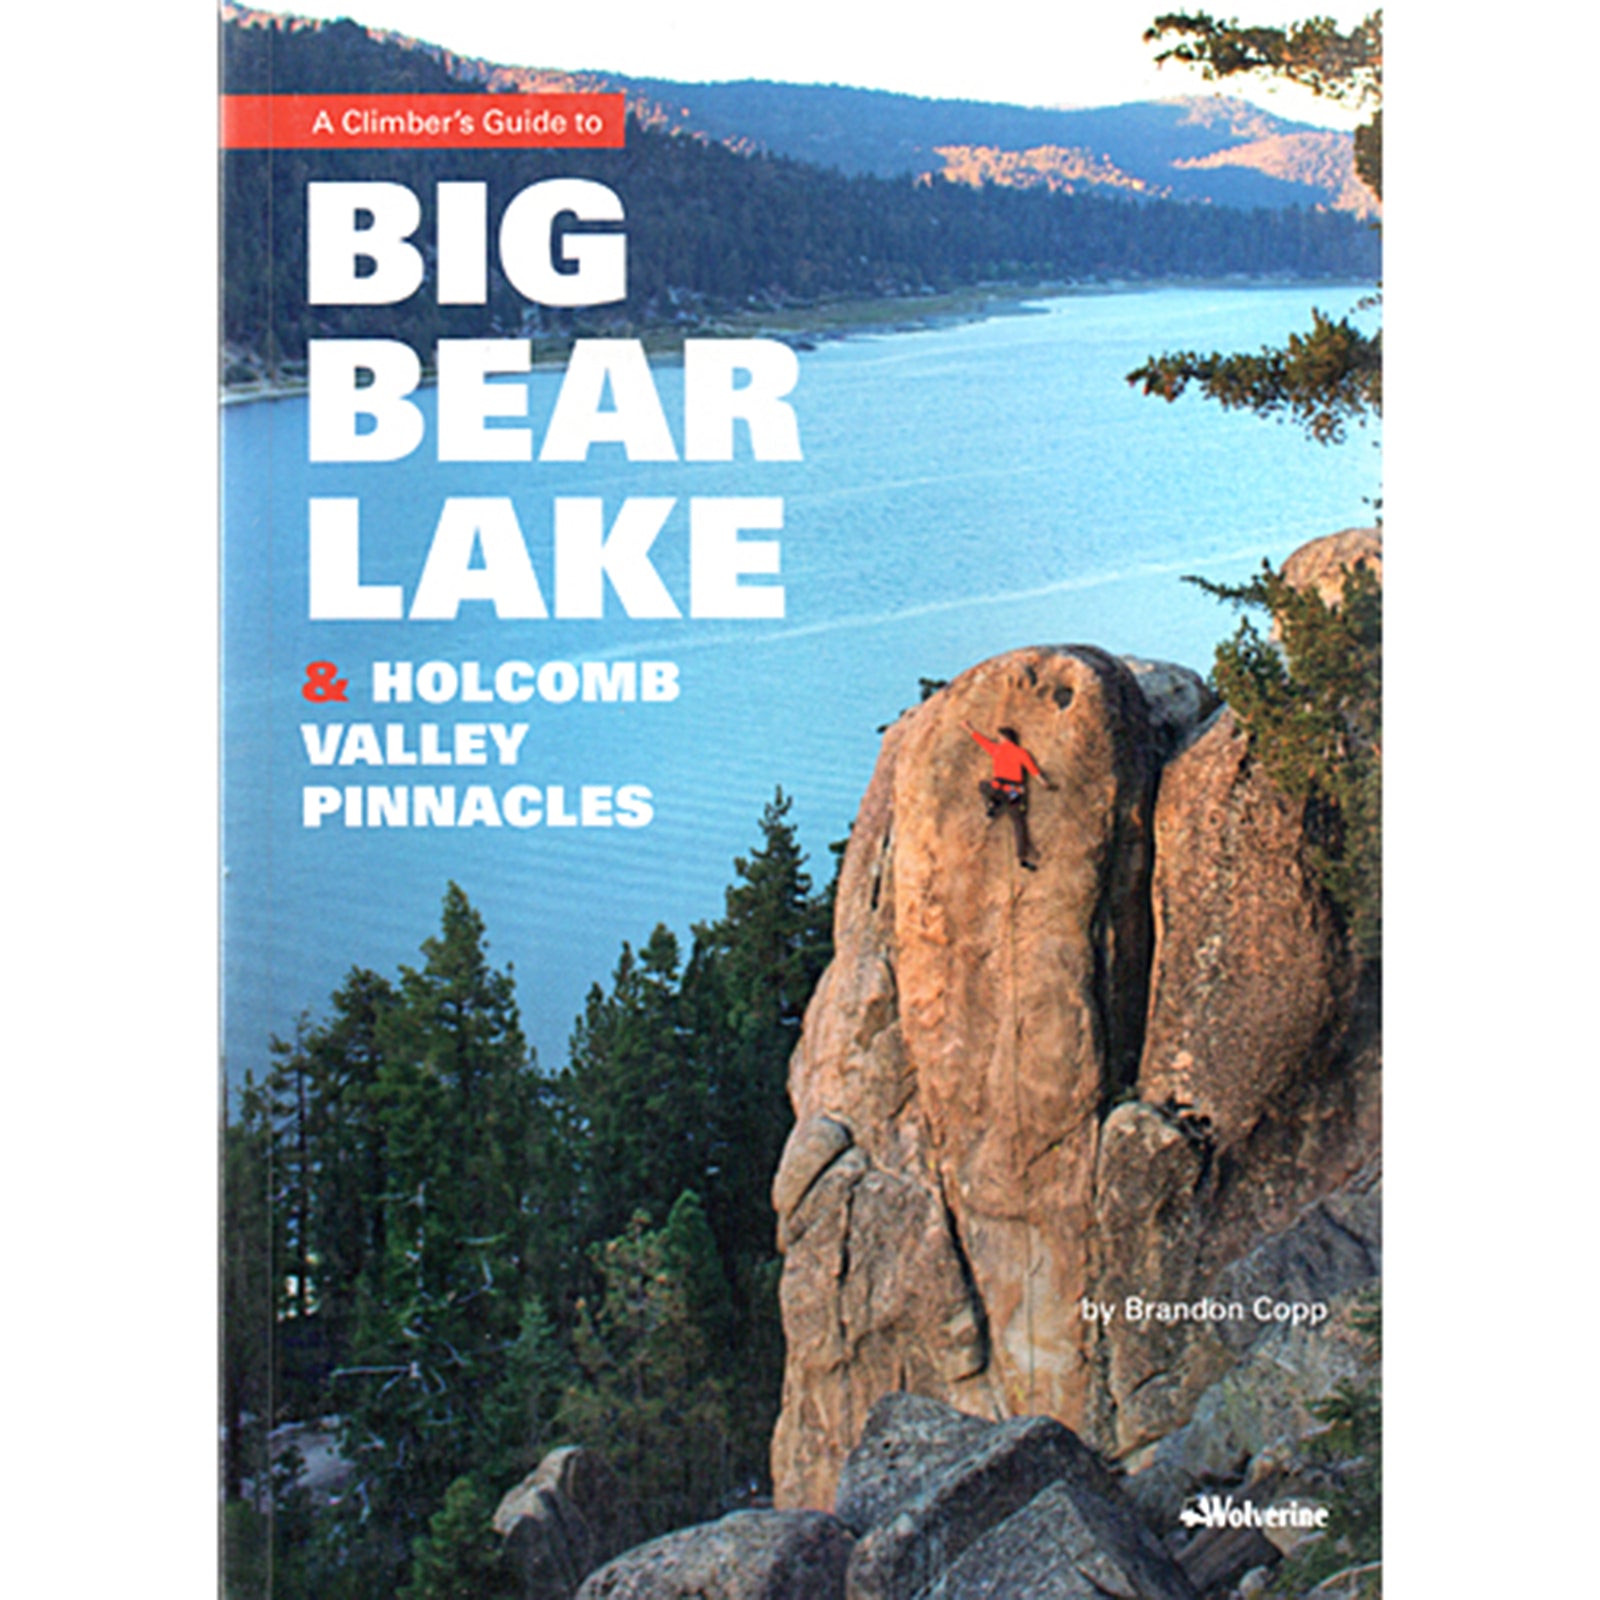 a person climbs a rock tower above Big Bear lake, on the cover of the Big Bear Lakes climbing guide